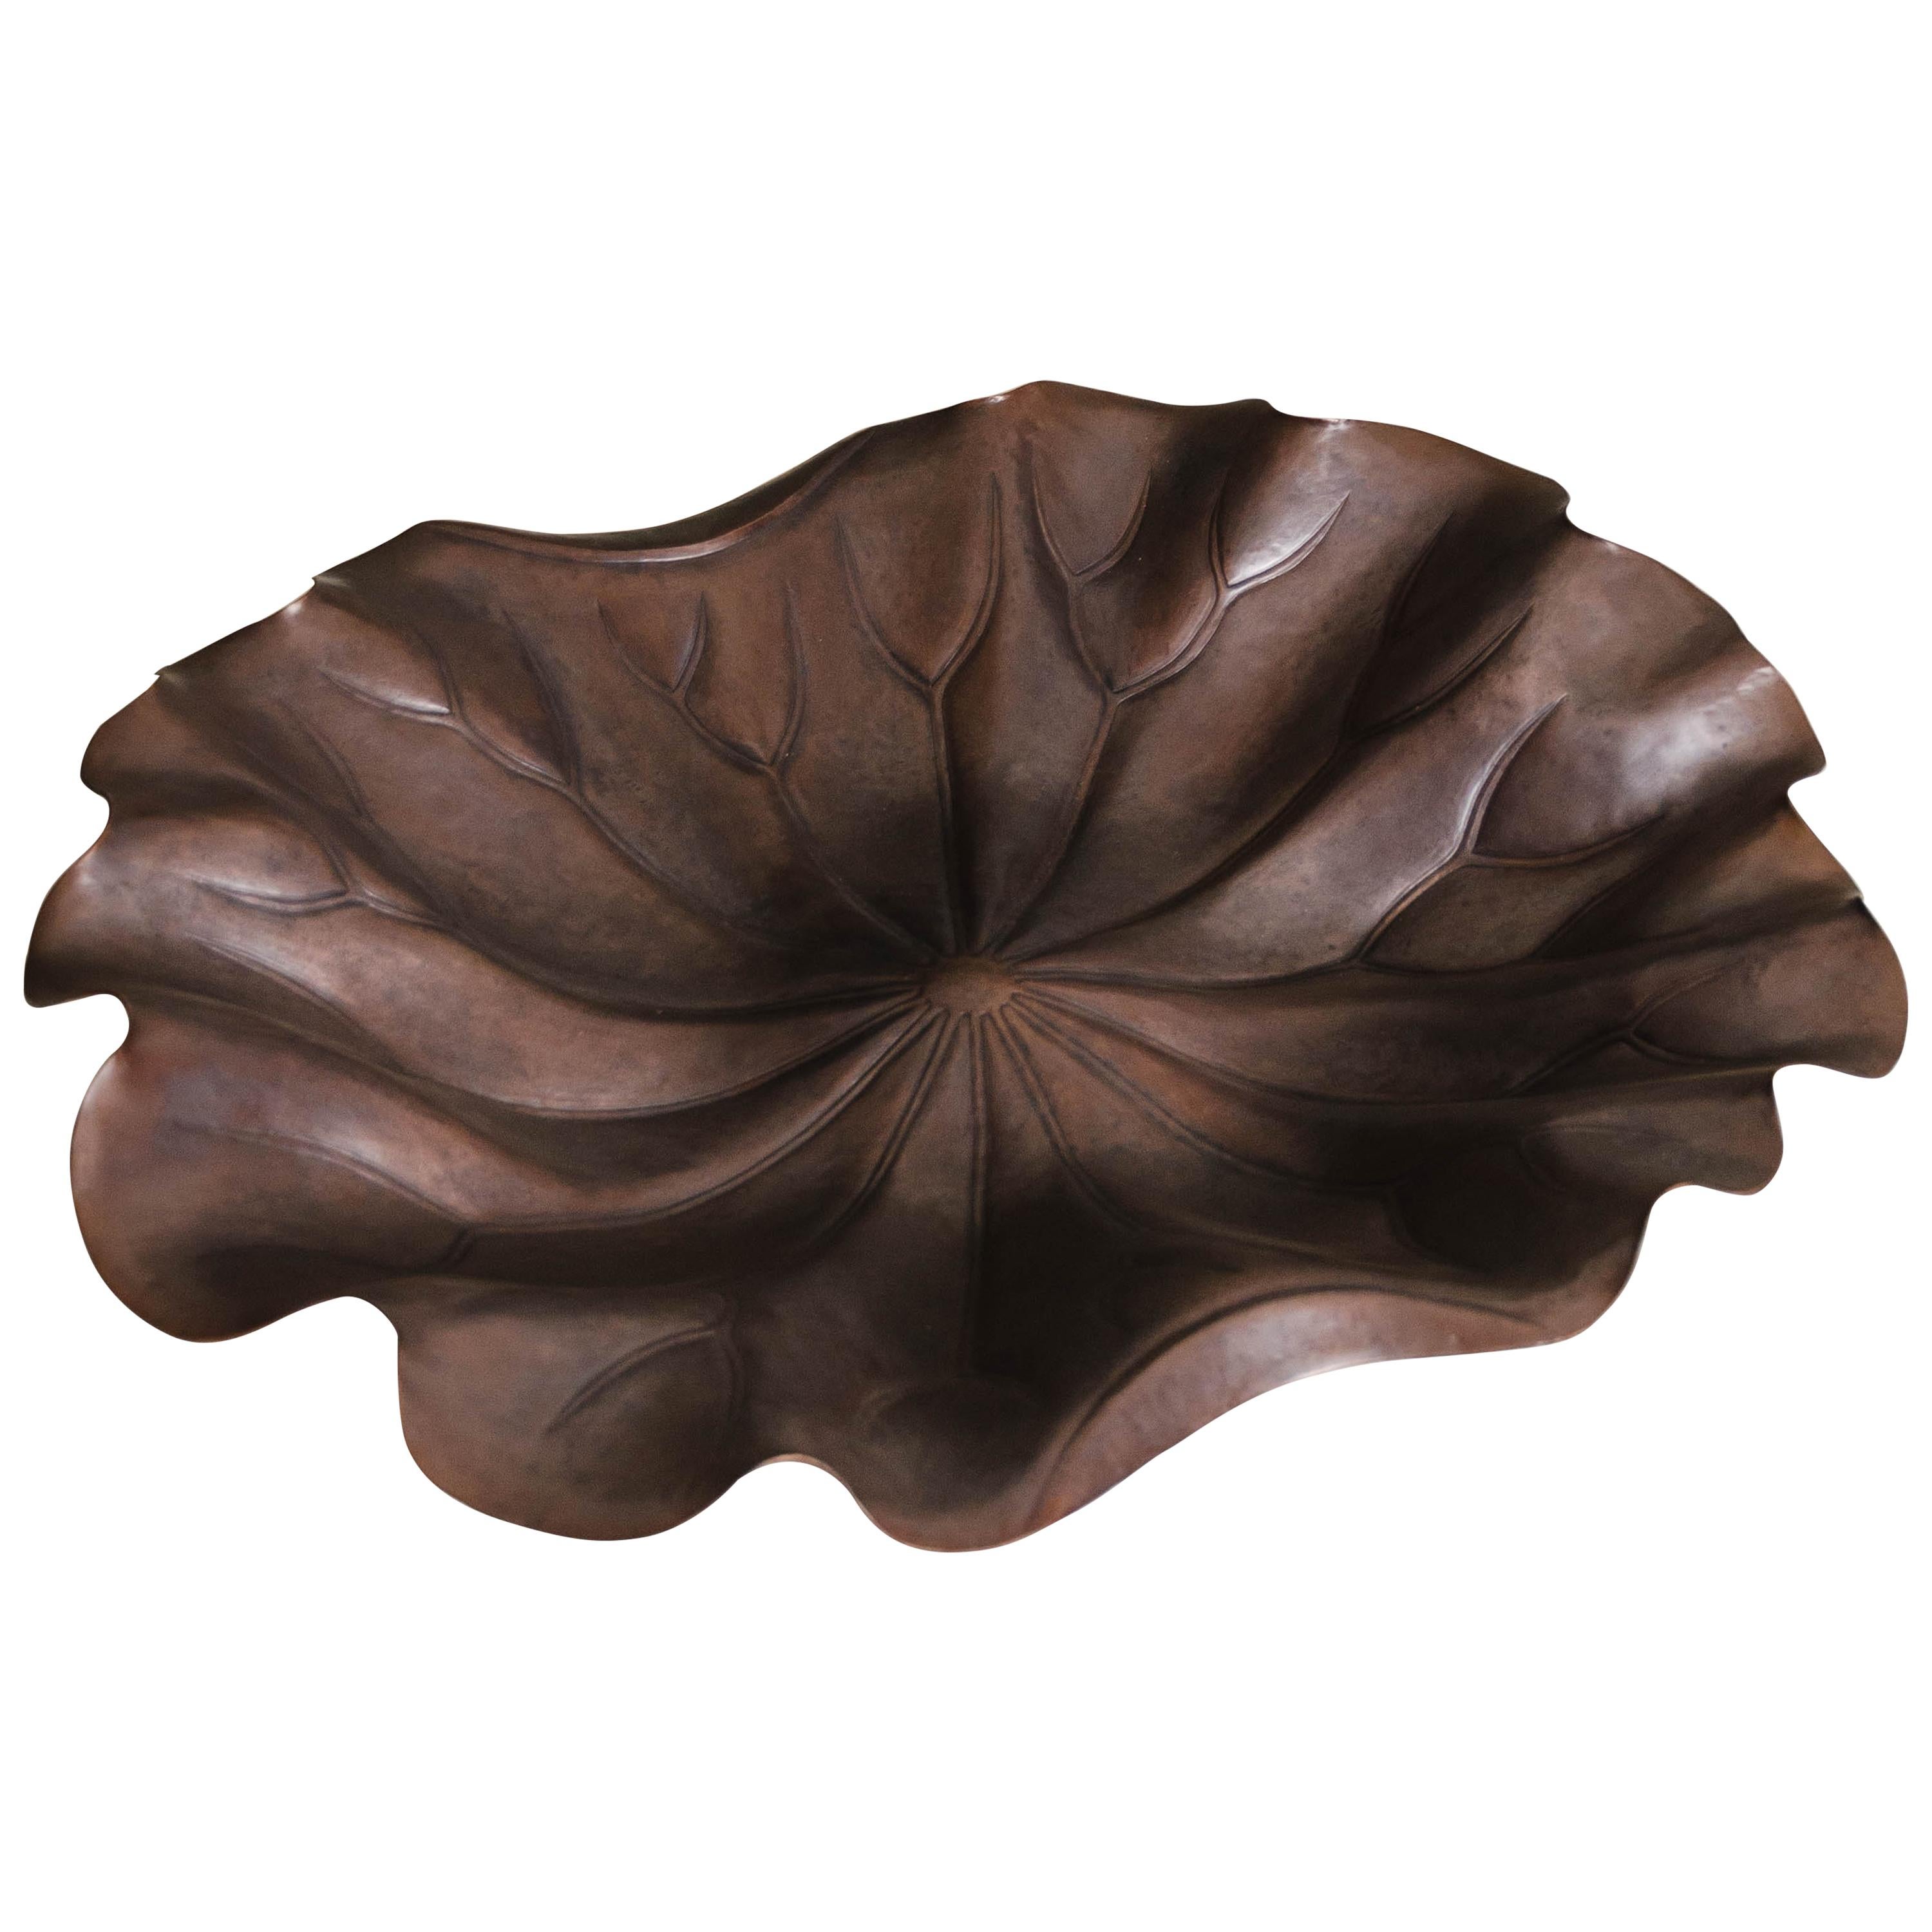 Copper Lotus Leaf Plate by Robert Kuo, Hand Repoussé, Limited Edition For Sale